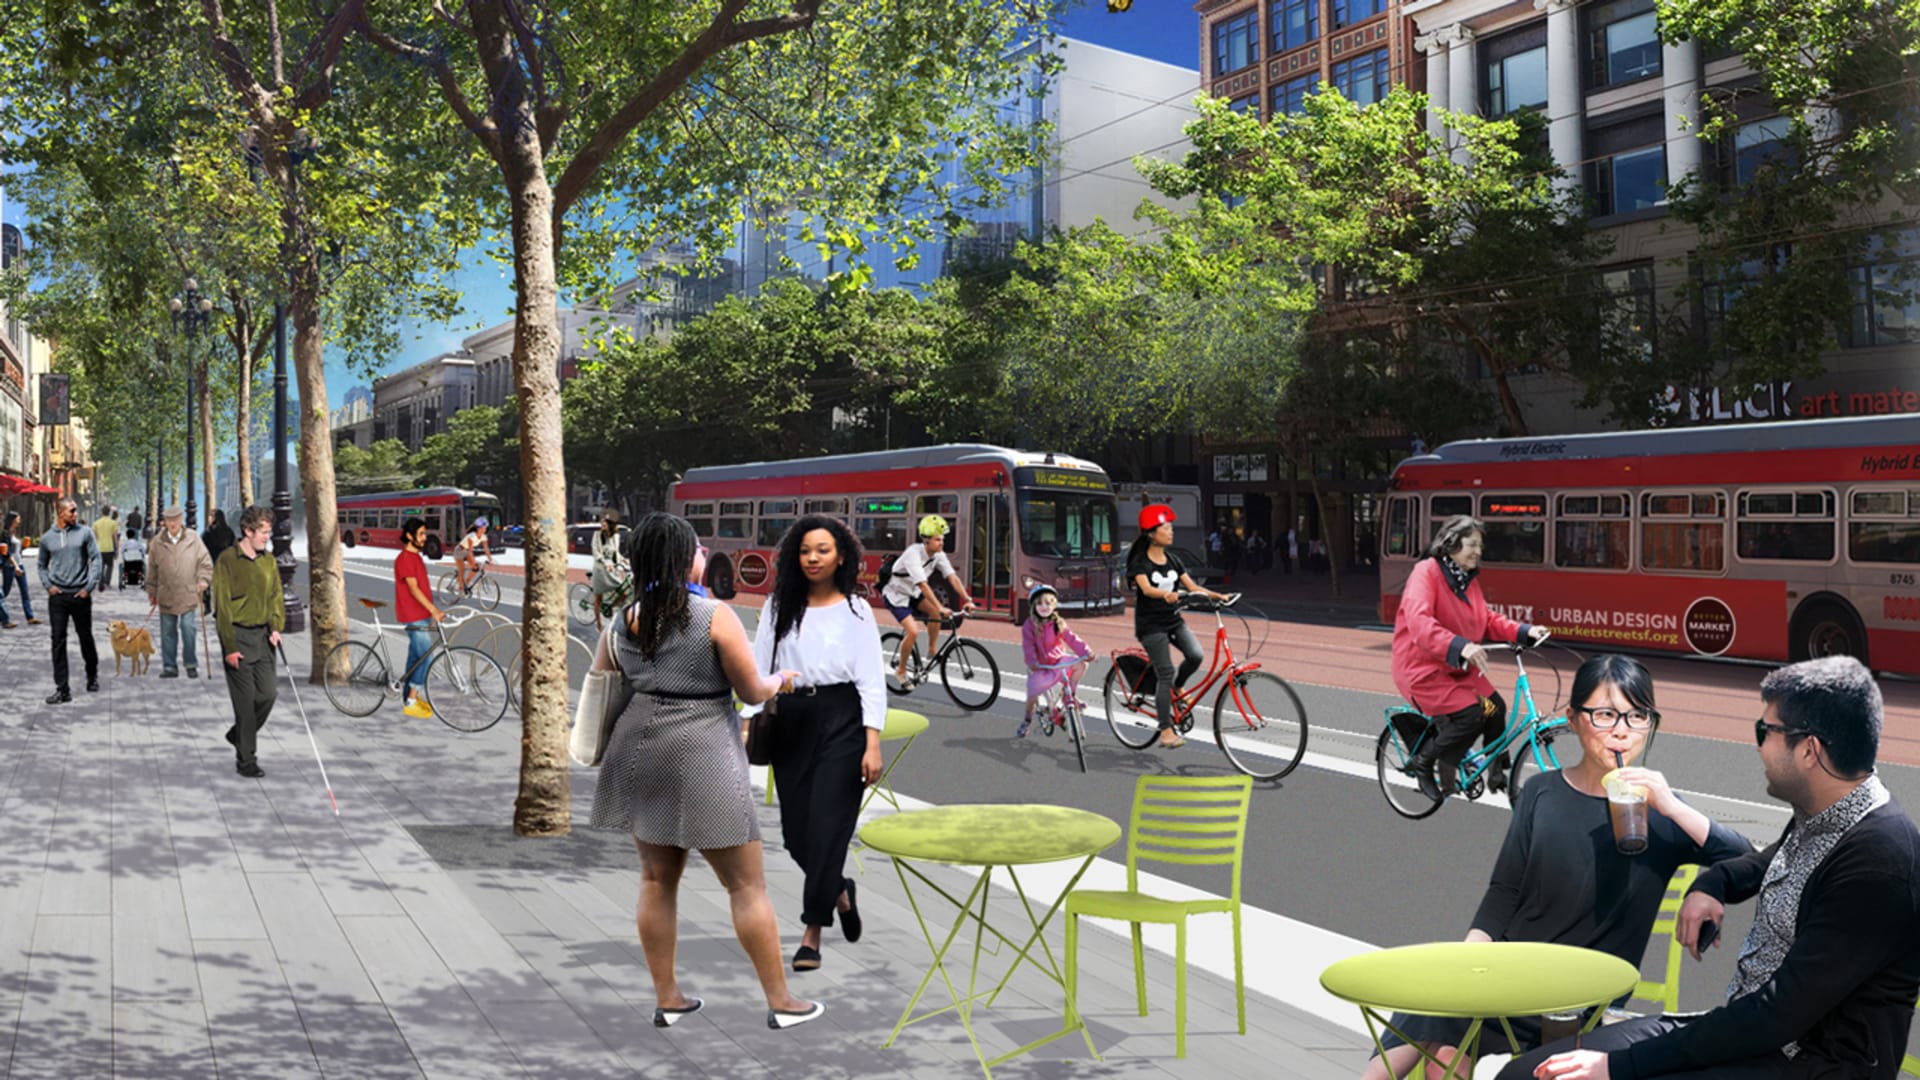 San Francisco is radically redesigning a major street to get rid of cars